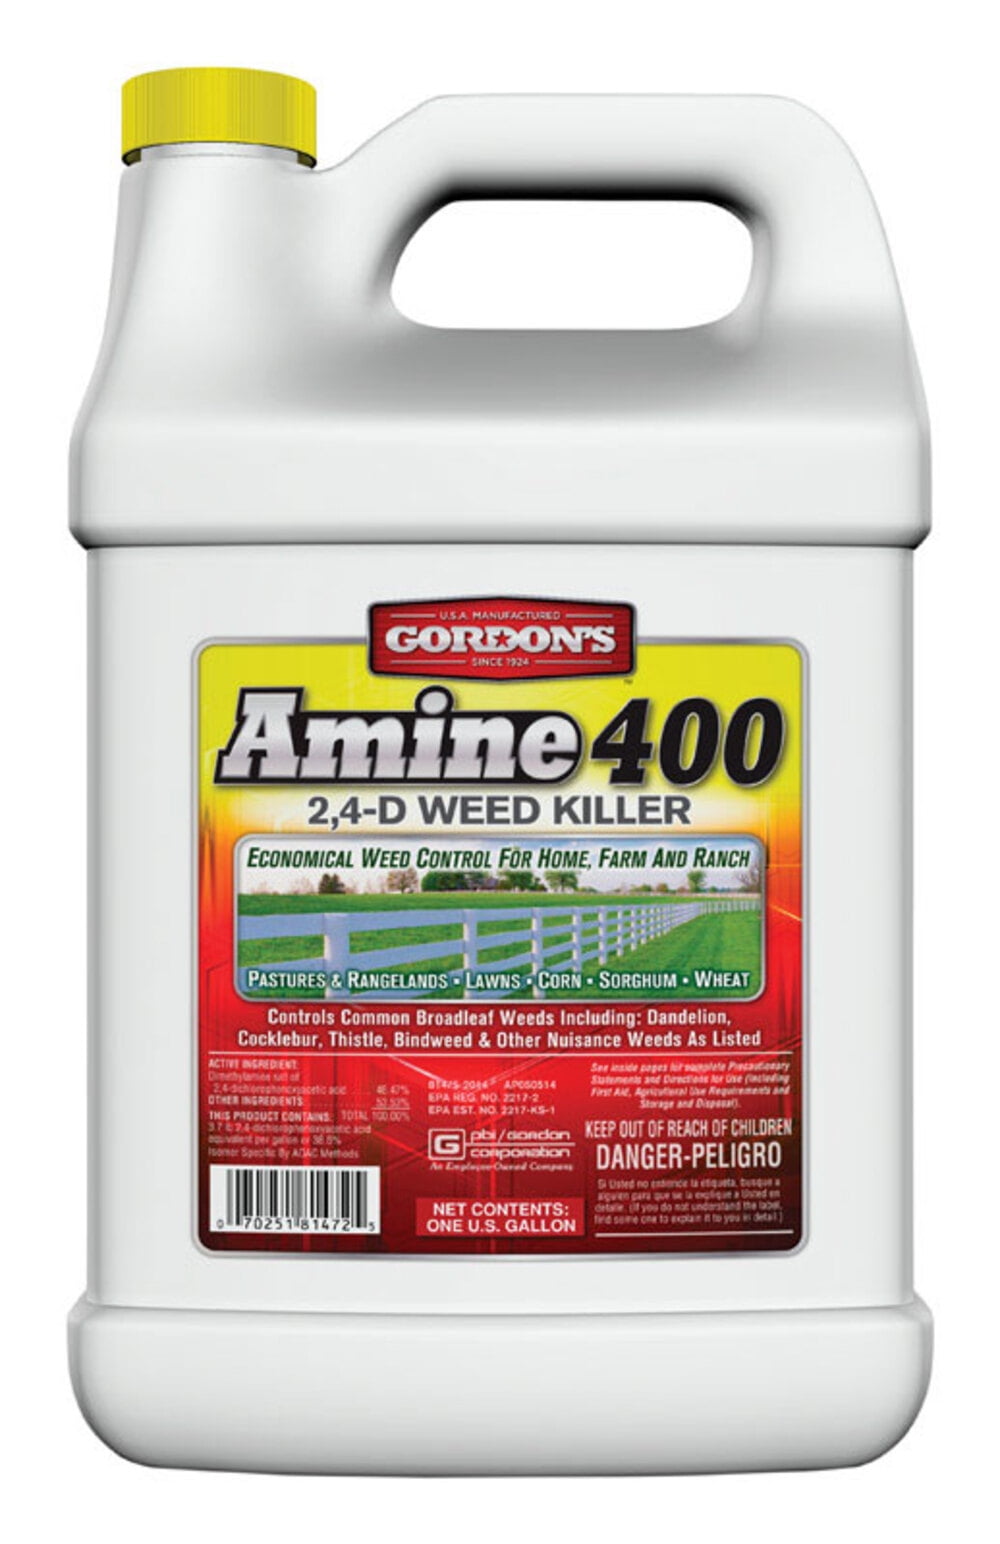 Image of Amine 400 weed killer being used by a landscaper